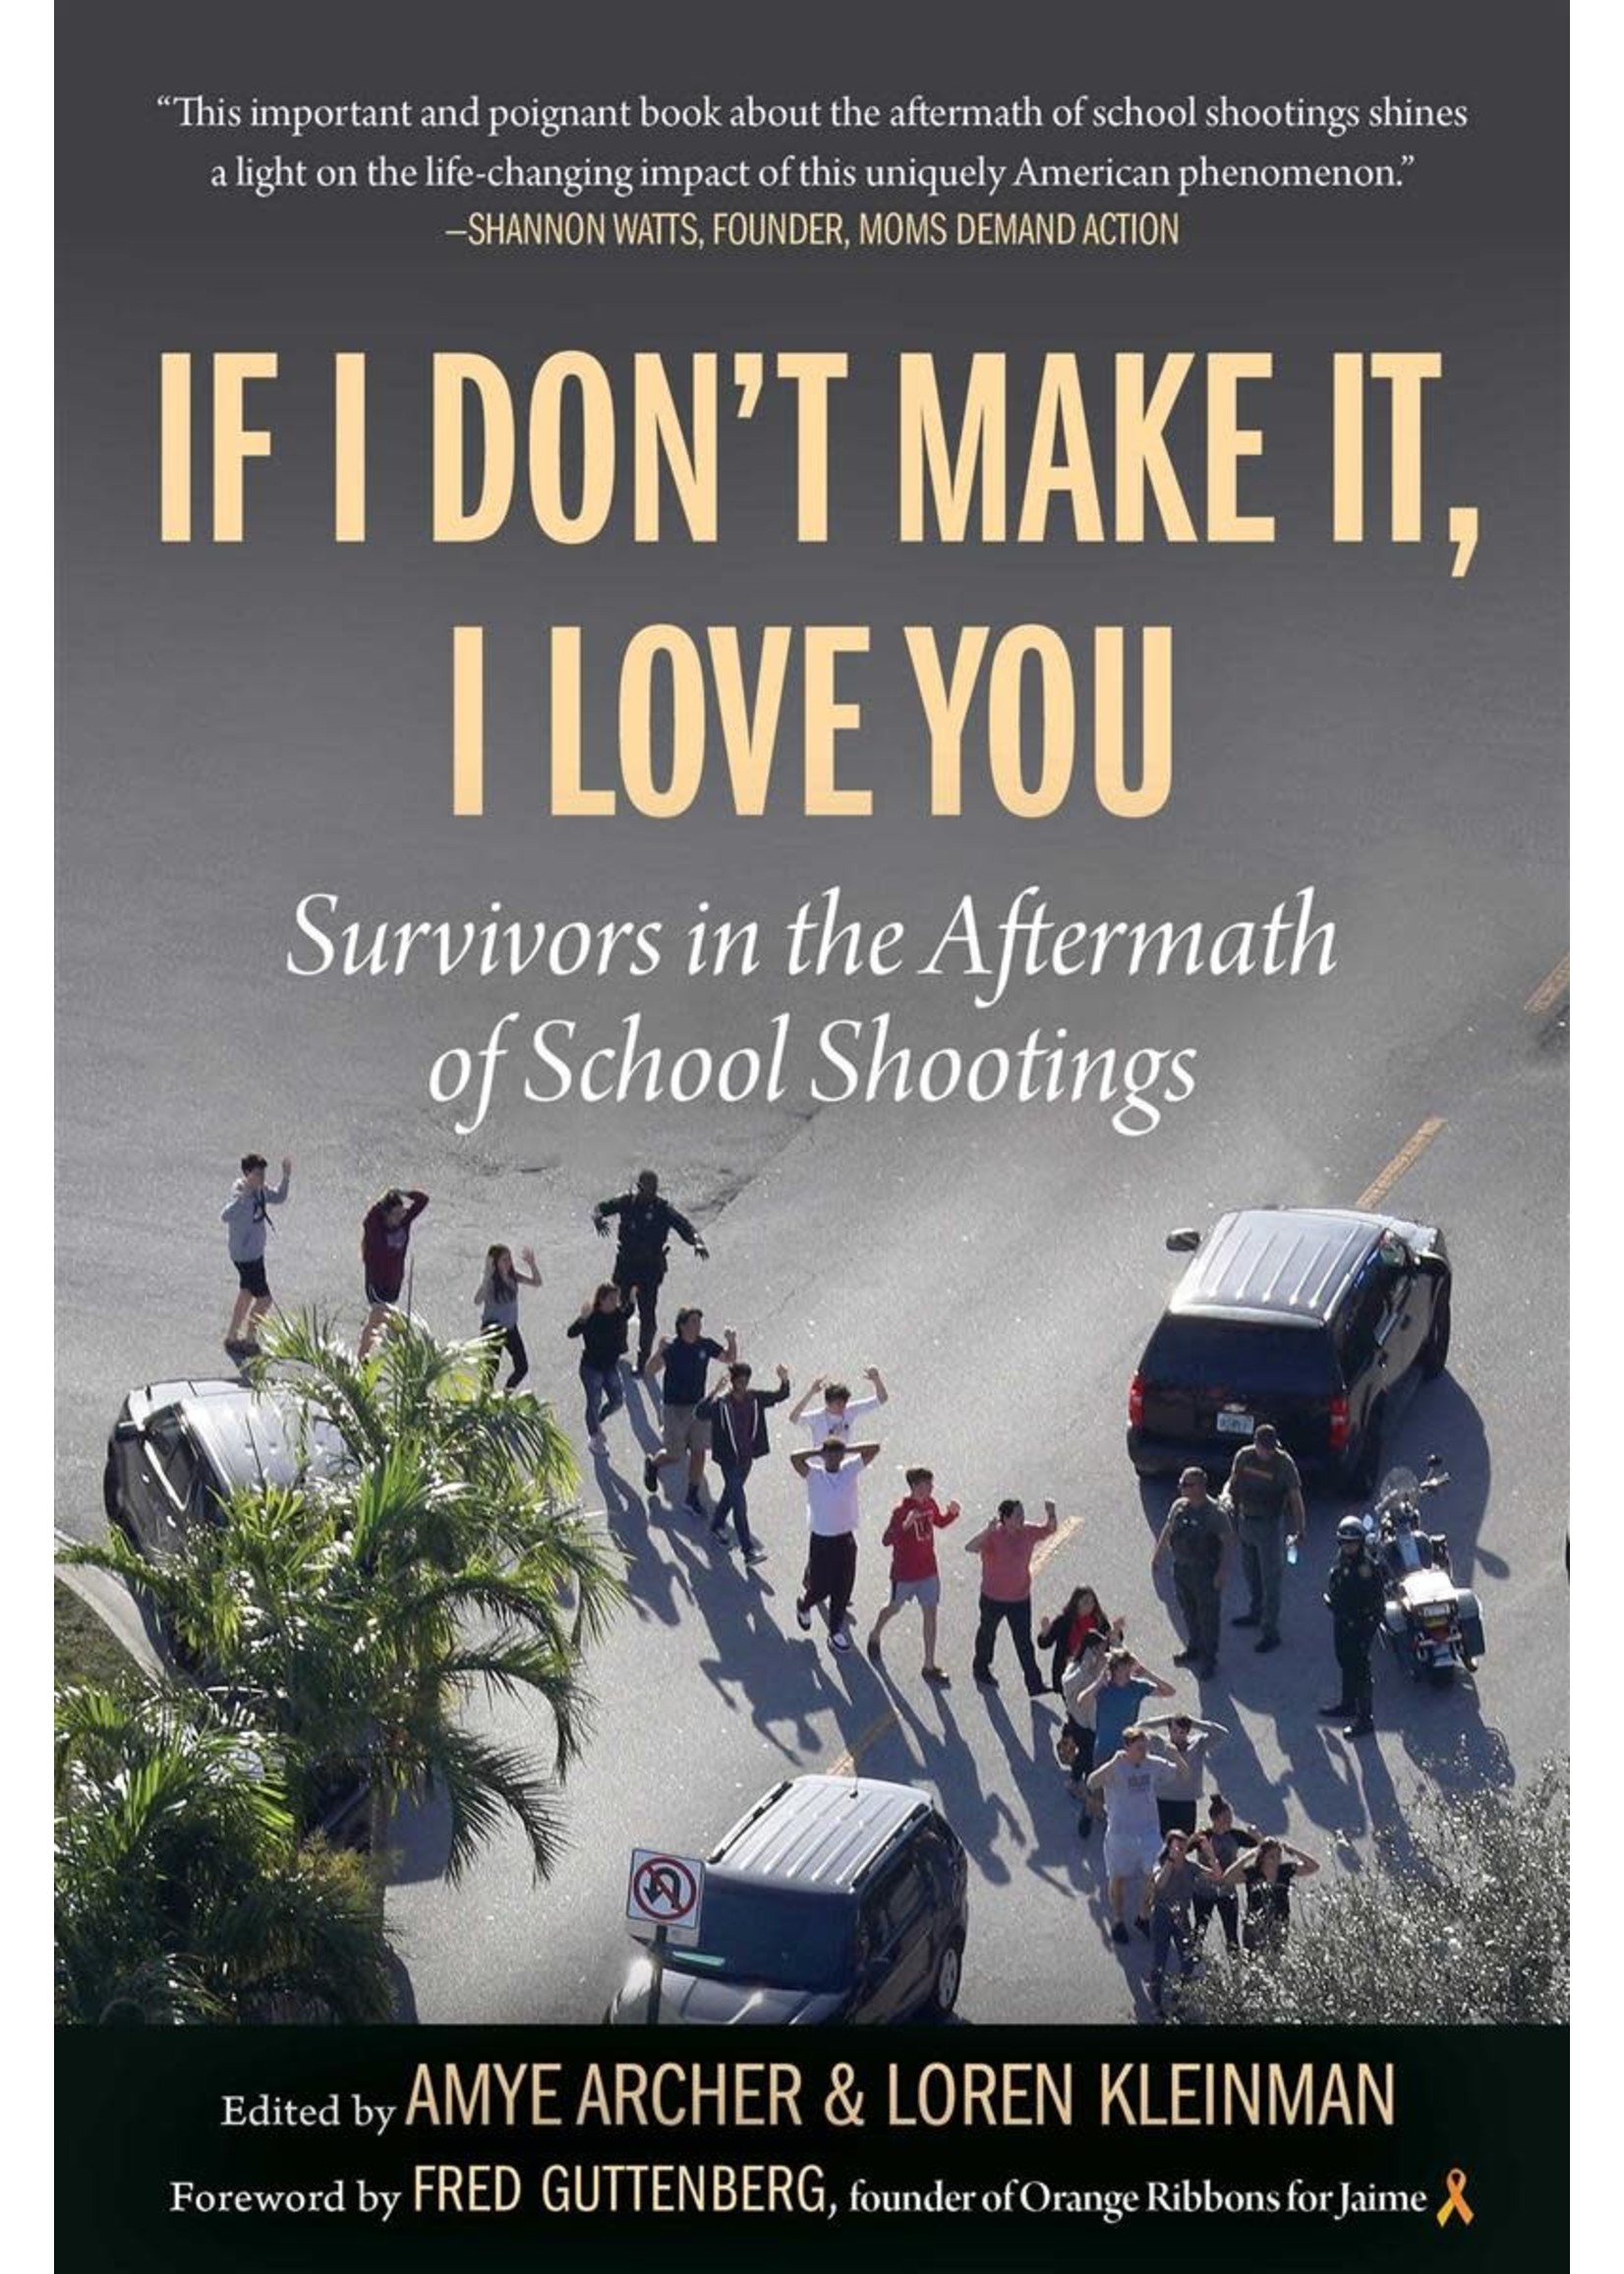 If I Don't Make It, I Love You: Survivors in the Aftermath of School Shootings by Amye Archer, Loren Kleinman